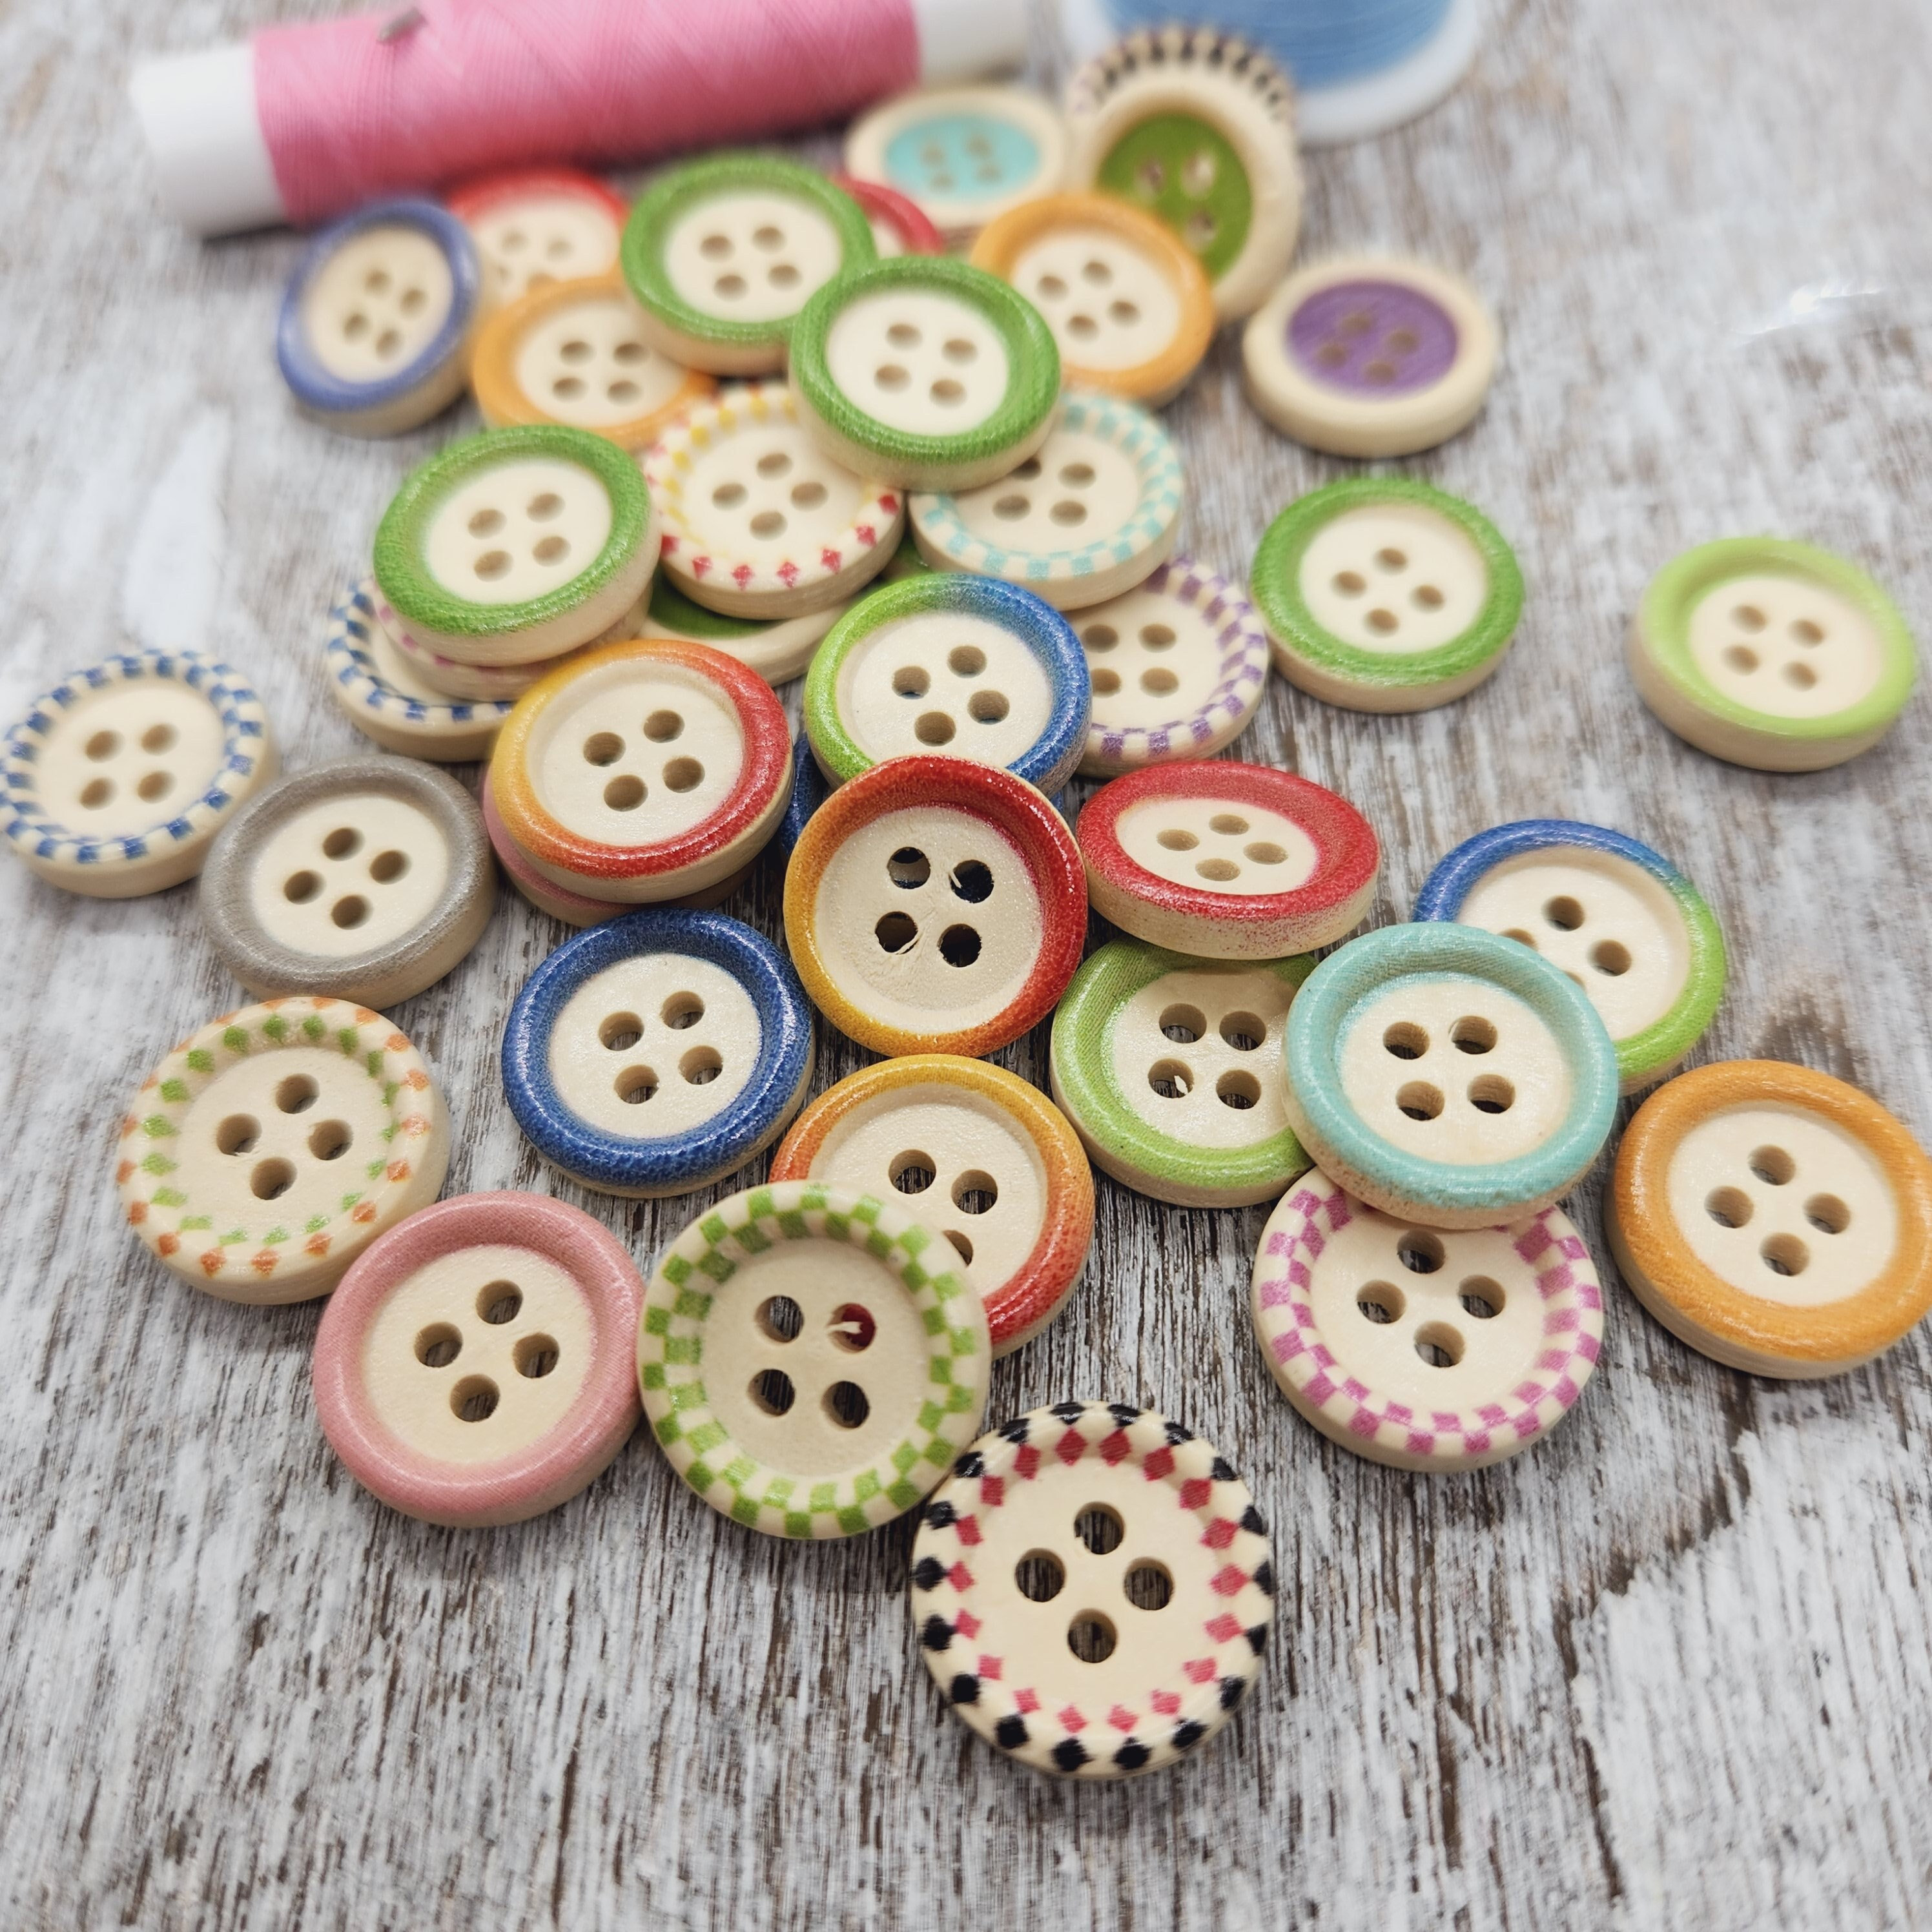 Tiny Heart Buttons Handmade Ceramic Buttons Sweet Clothing Accent Small  Buttons Clothing Finish Heart Button Focal Buttons for Baby 